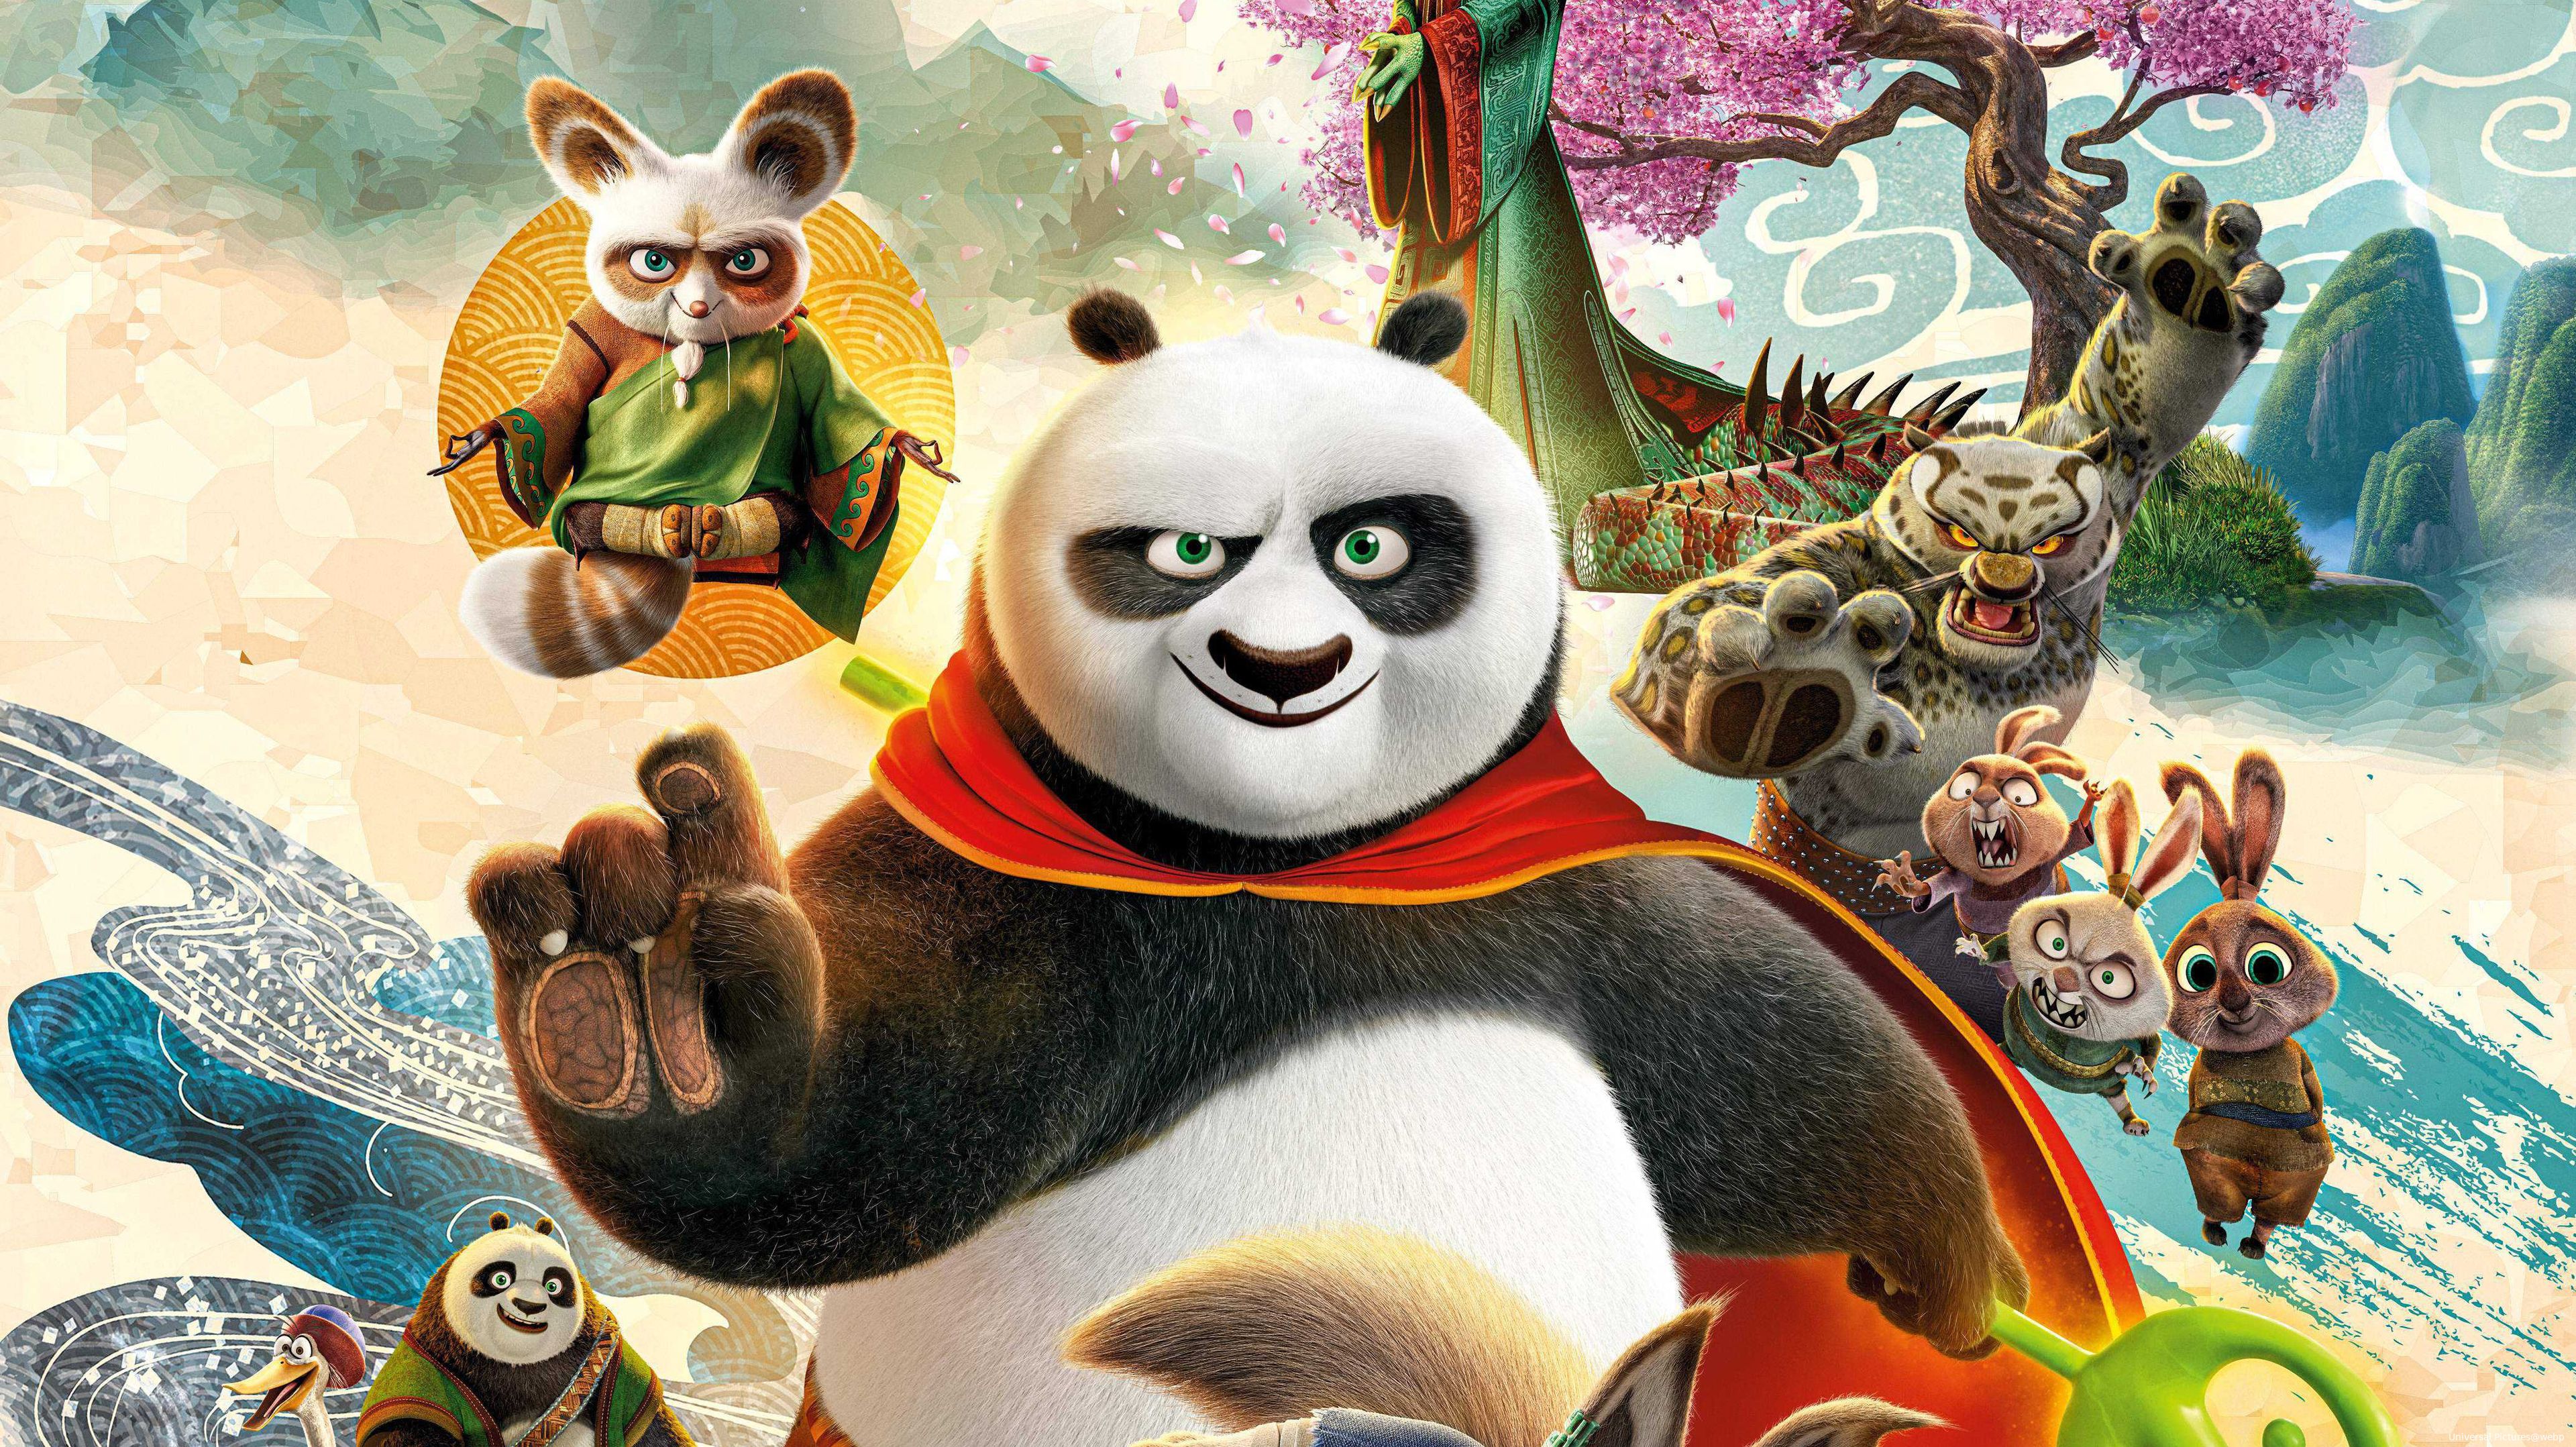 kung fu panda 4 ov ps 1 jpg sd high 2023 dreamworks animation all rights reserved 1f1710512683